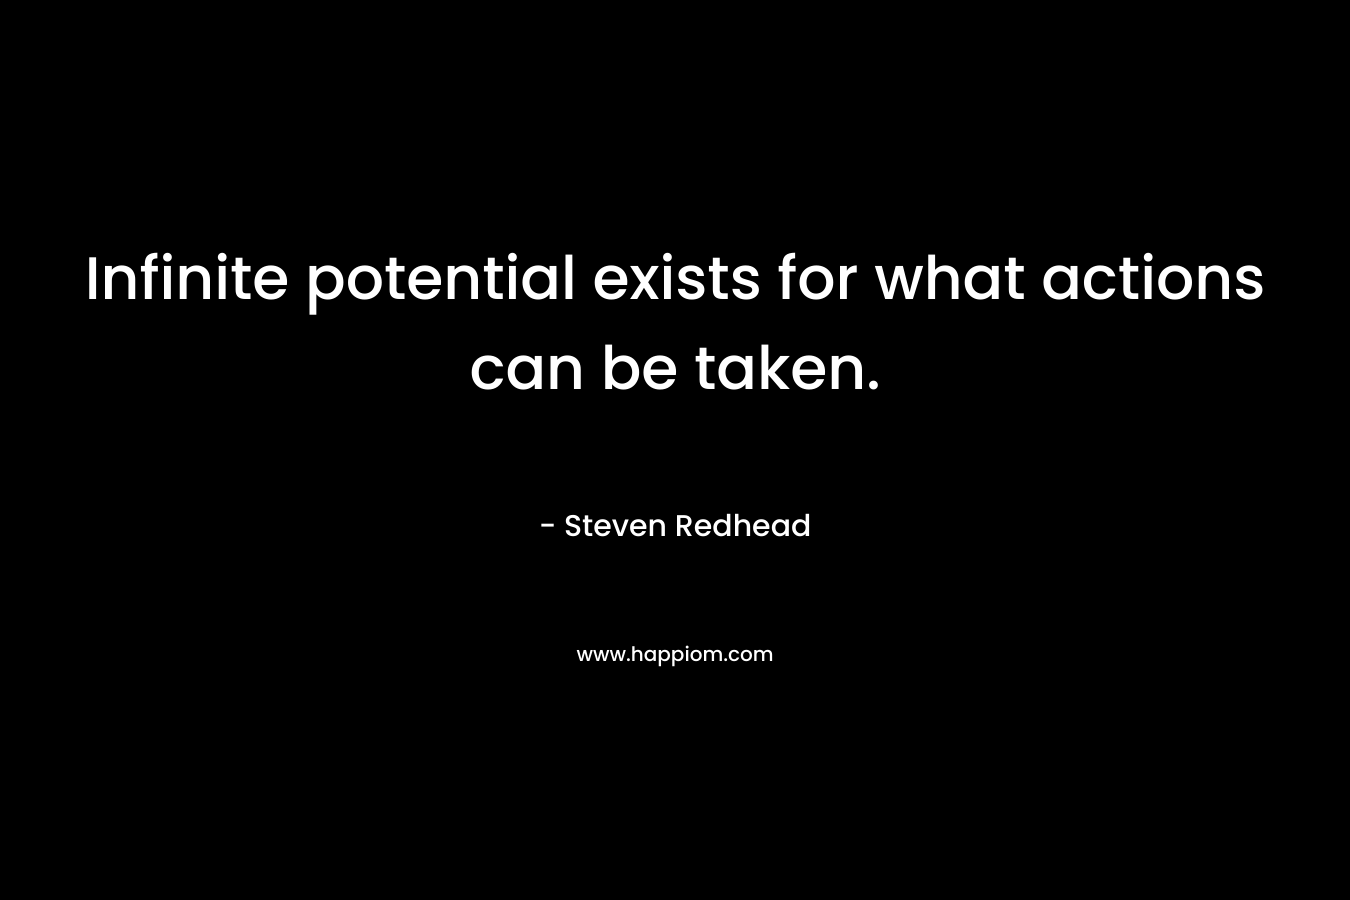 Infinite potential exists for what actions can be taken.